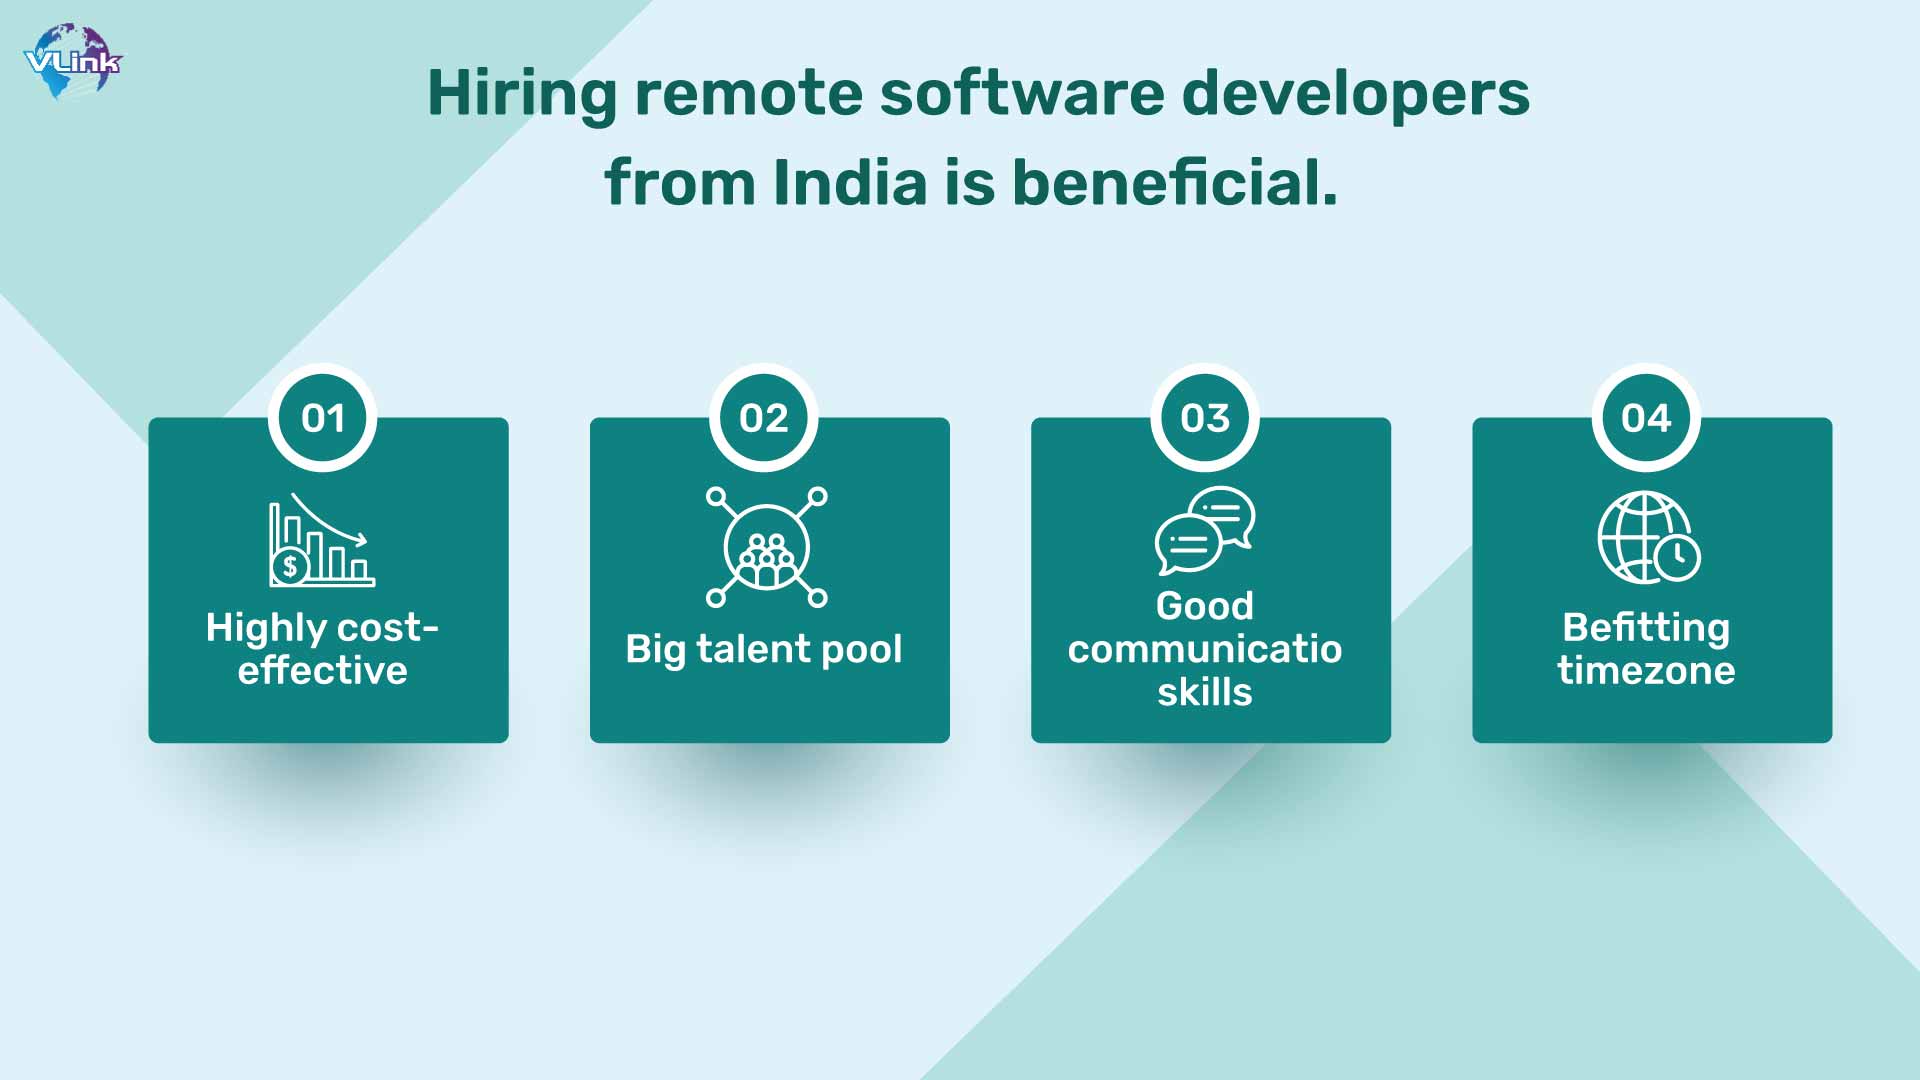 Hiring remote software developers from India is beneficial